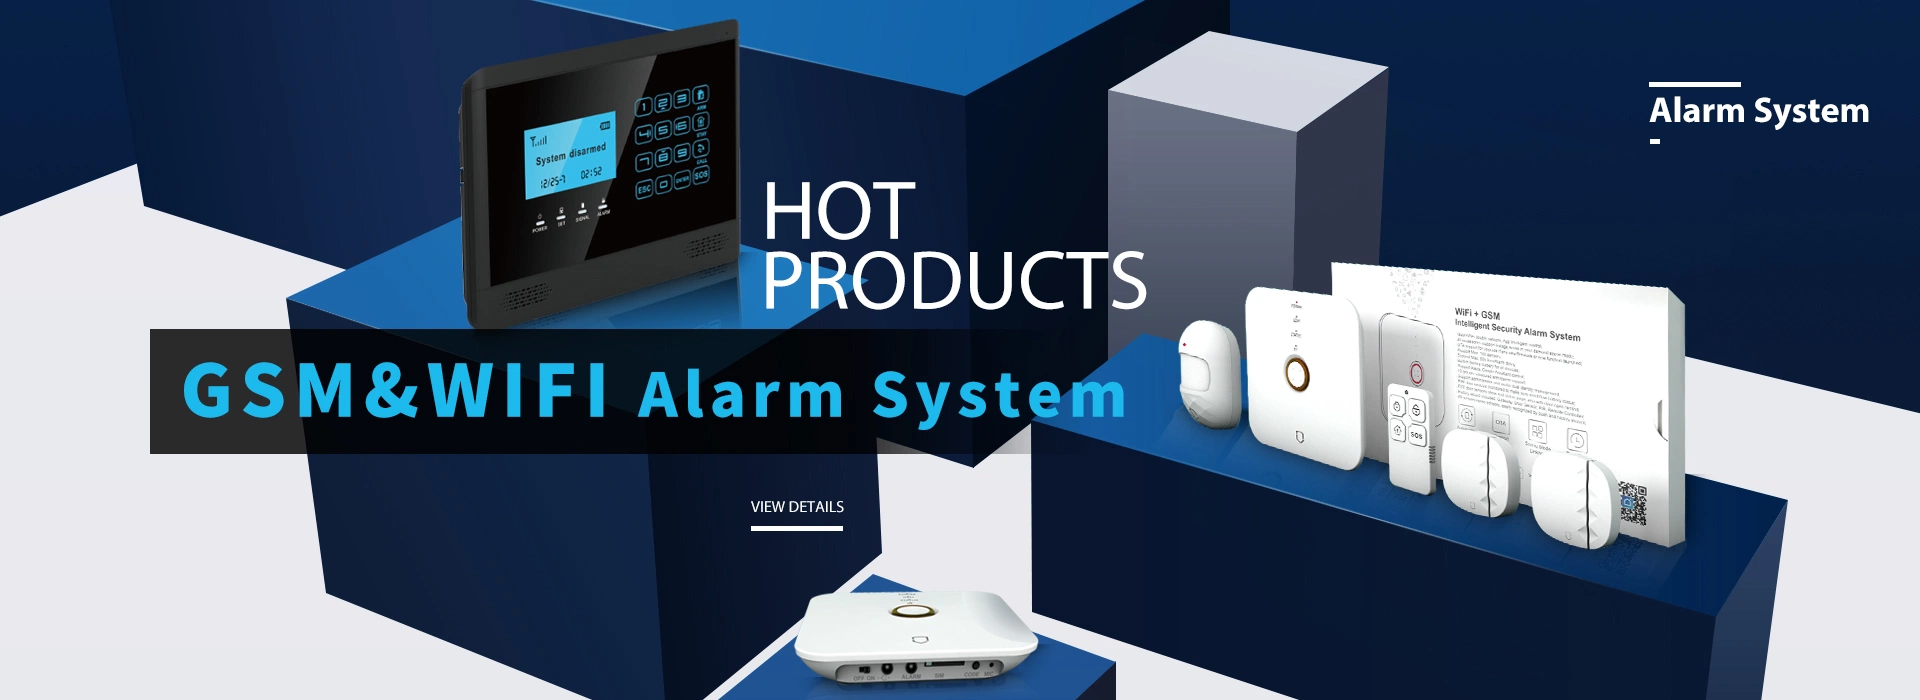 OEM ODM GSM 4G WiFi Security Alarm System with Smoke Fire Gas Door Motion Alarm for Smart Home Safe